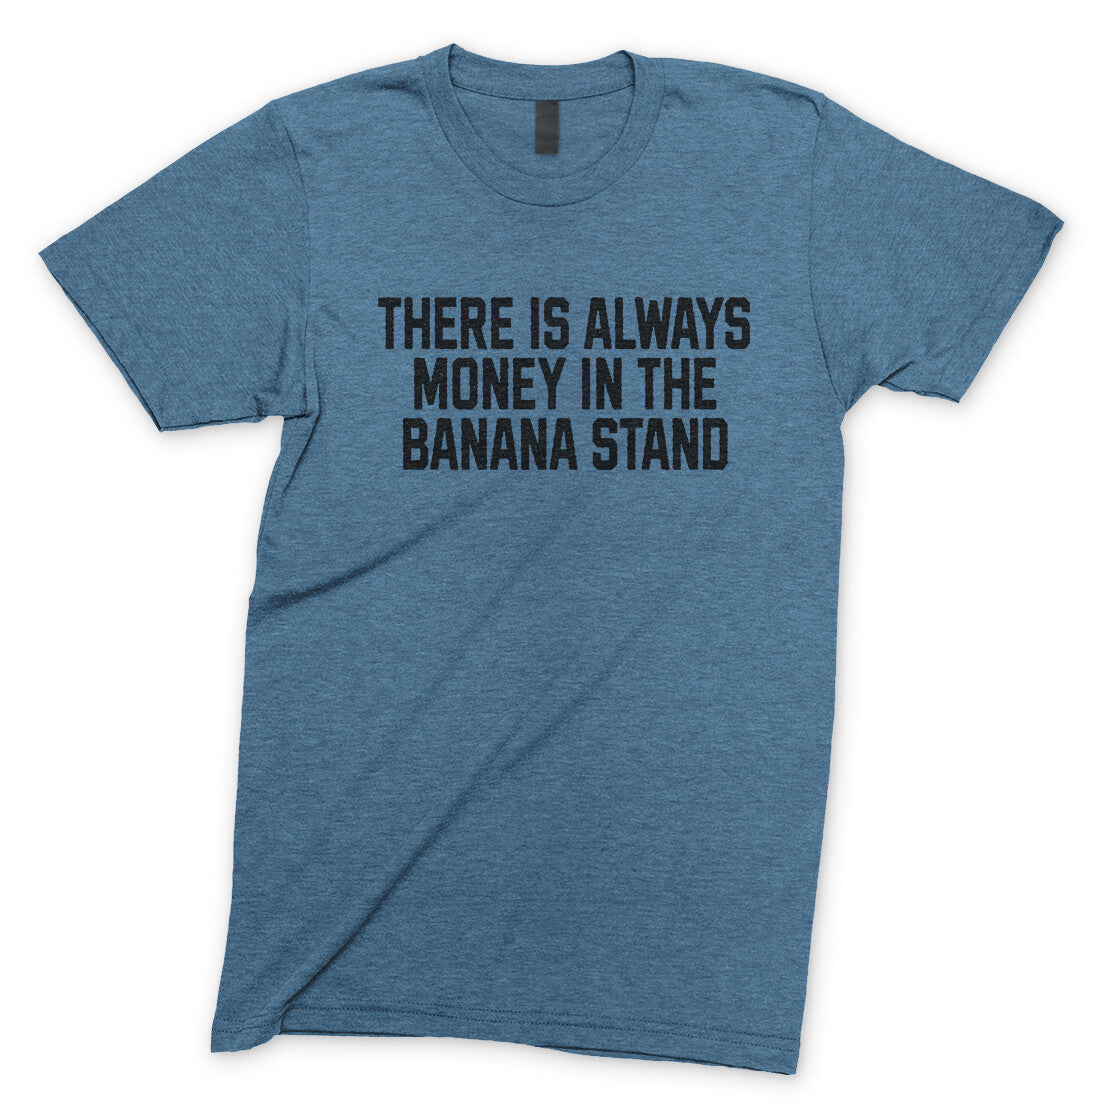 There is Always Money in the Banana Stand in Heather Indigo Color